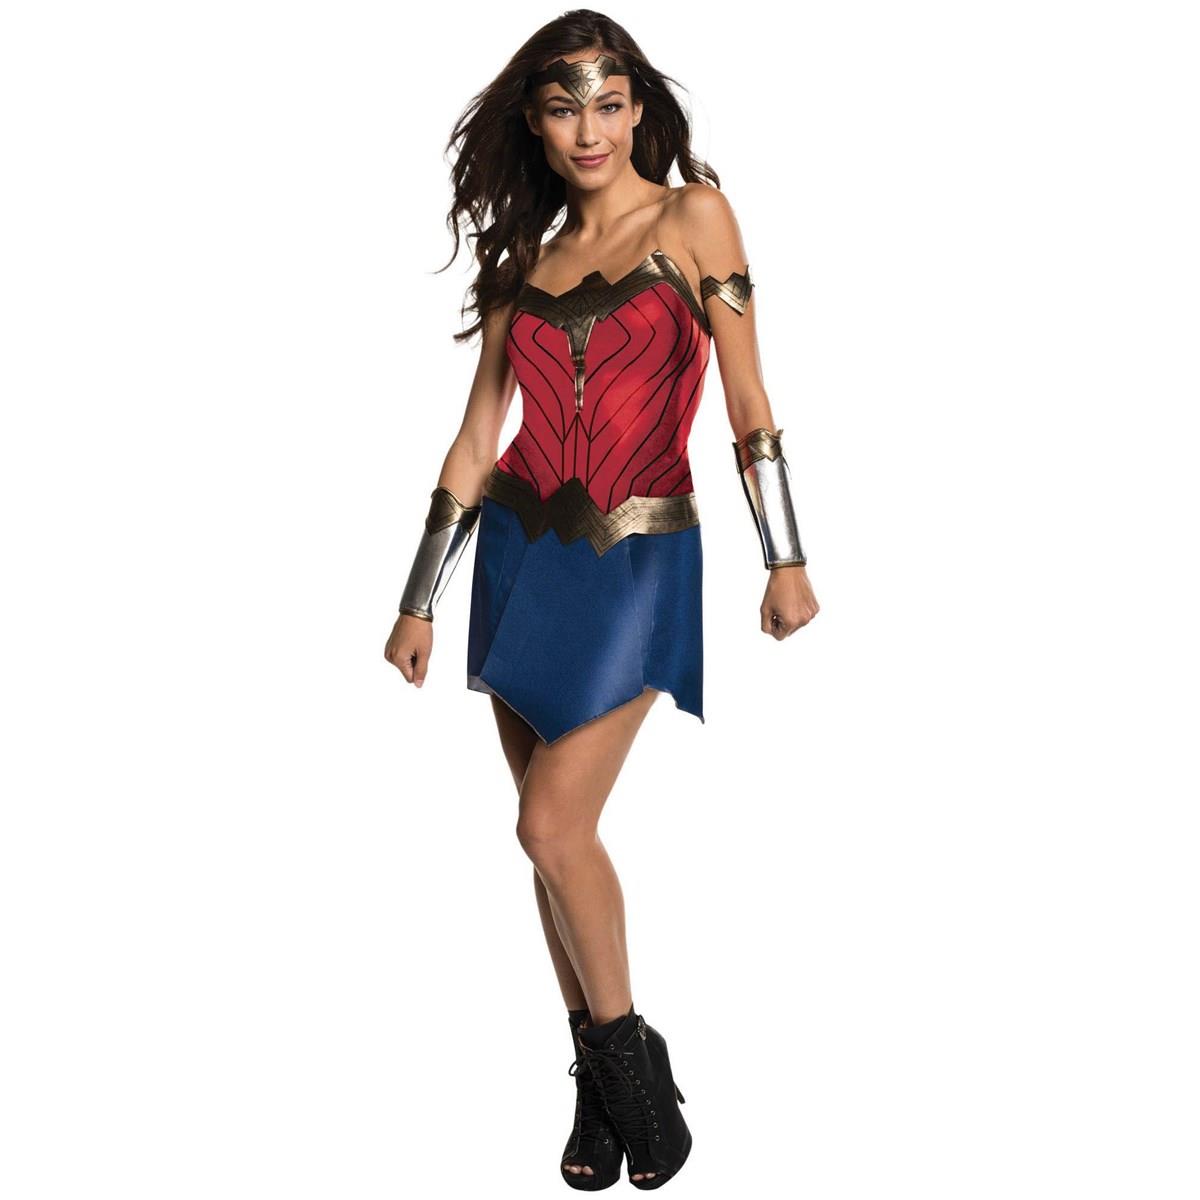 Picture of Rubies 279614 Halloween Adult Wonder Woman Costume - Large